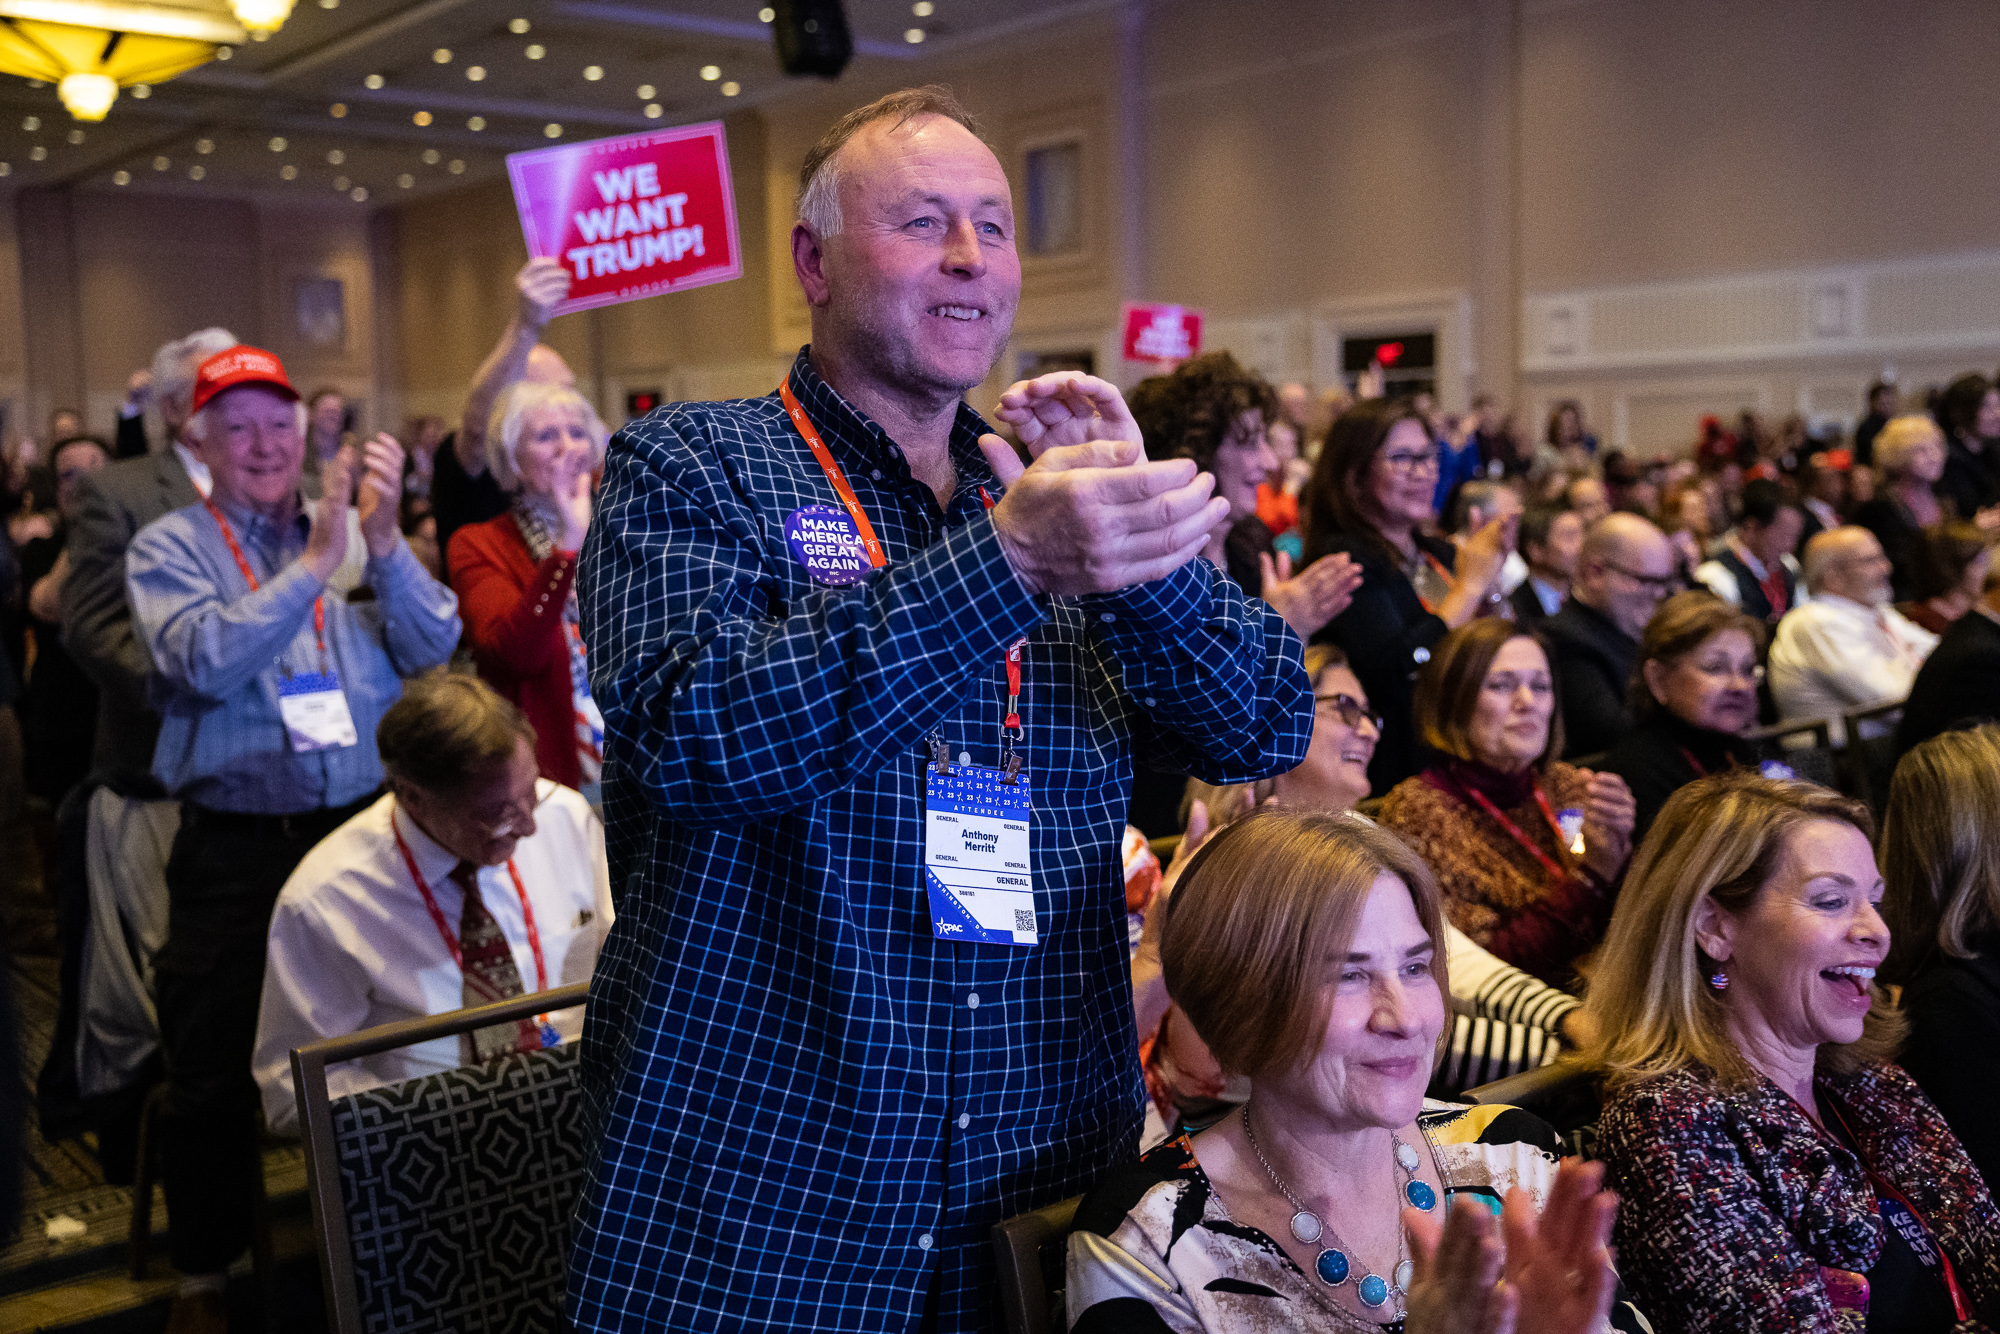 Audience members react during former President Donald Trump's speech at the Conservative Political Action Conference (CPAC) at the Gaylord National Resort and Convention Center in National Harbor, Md. on March 4, 2023.